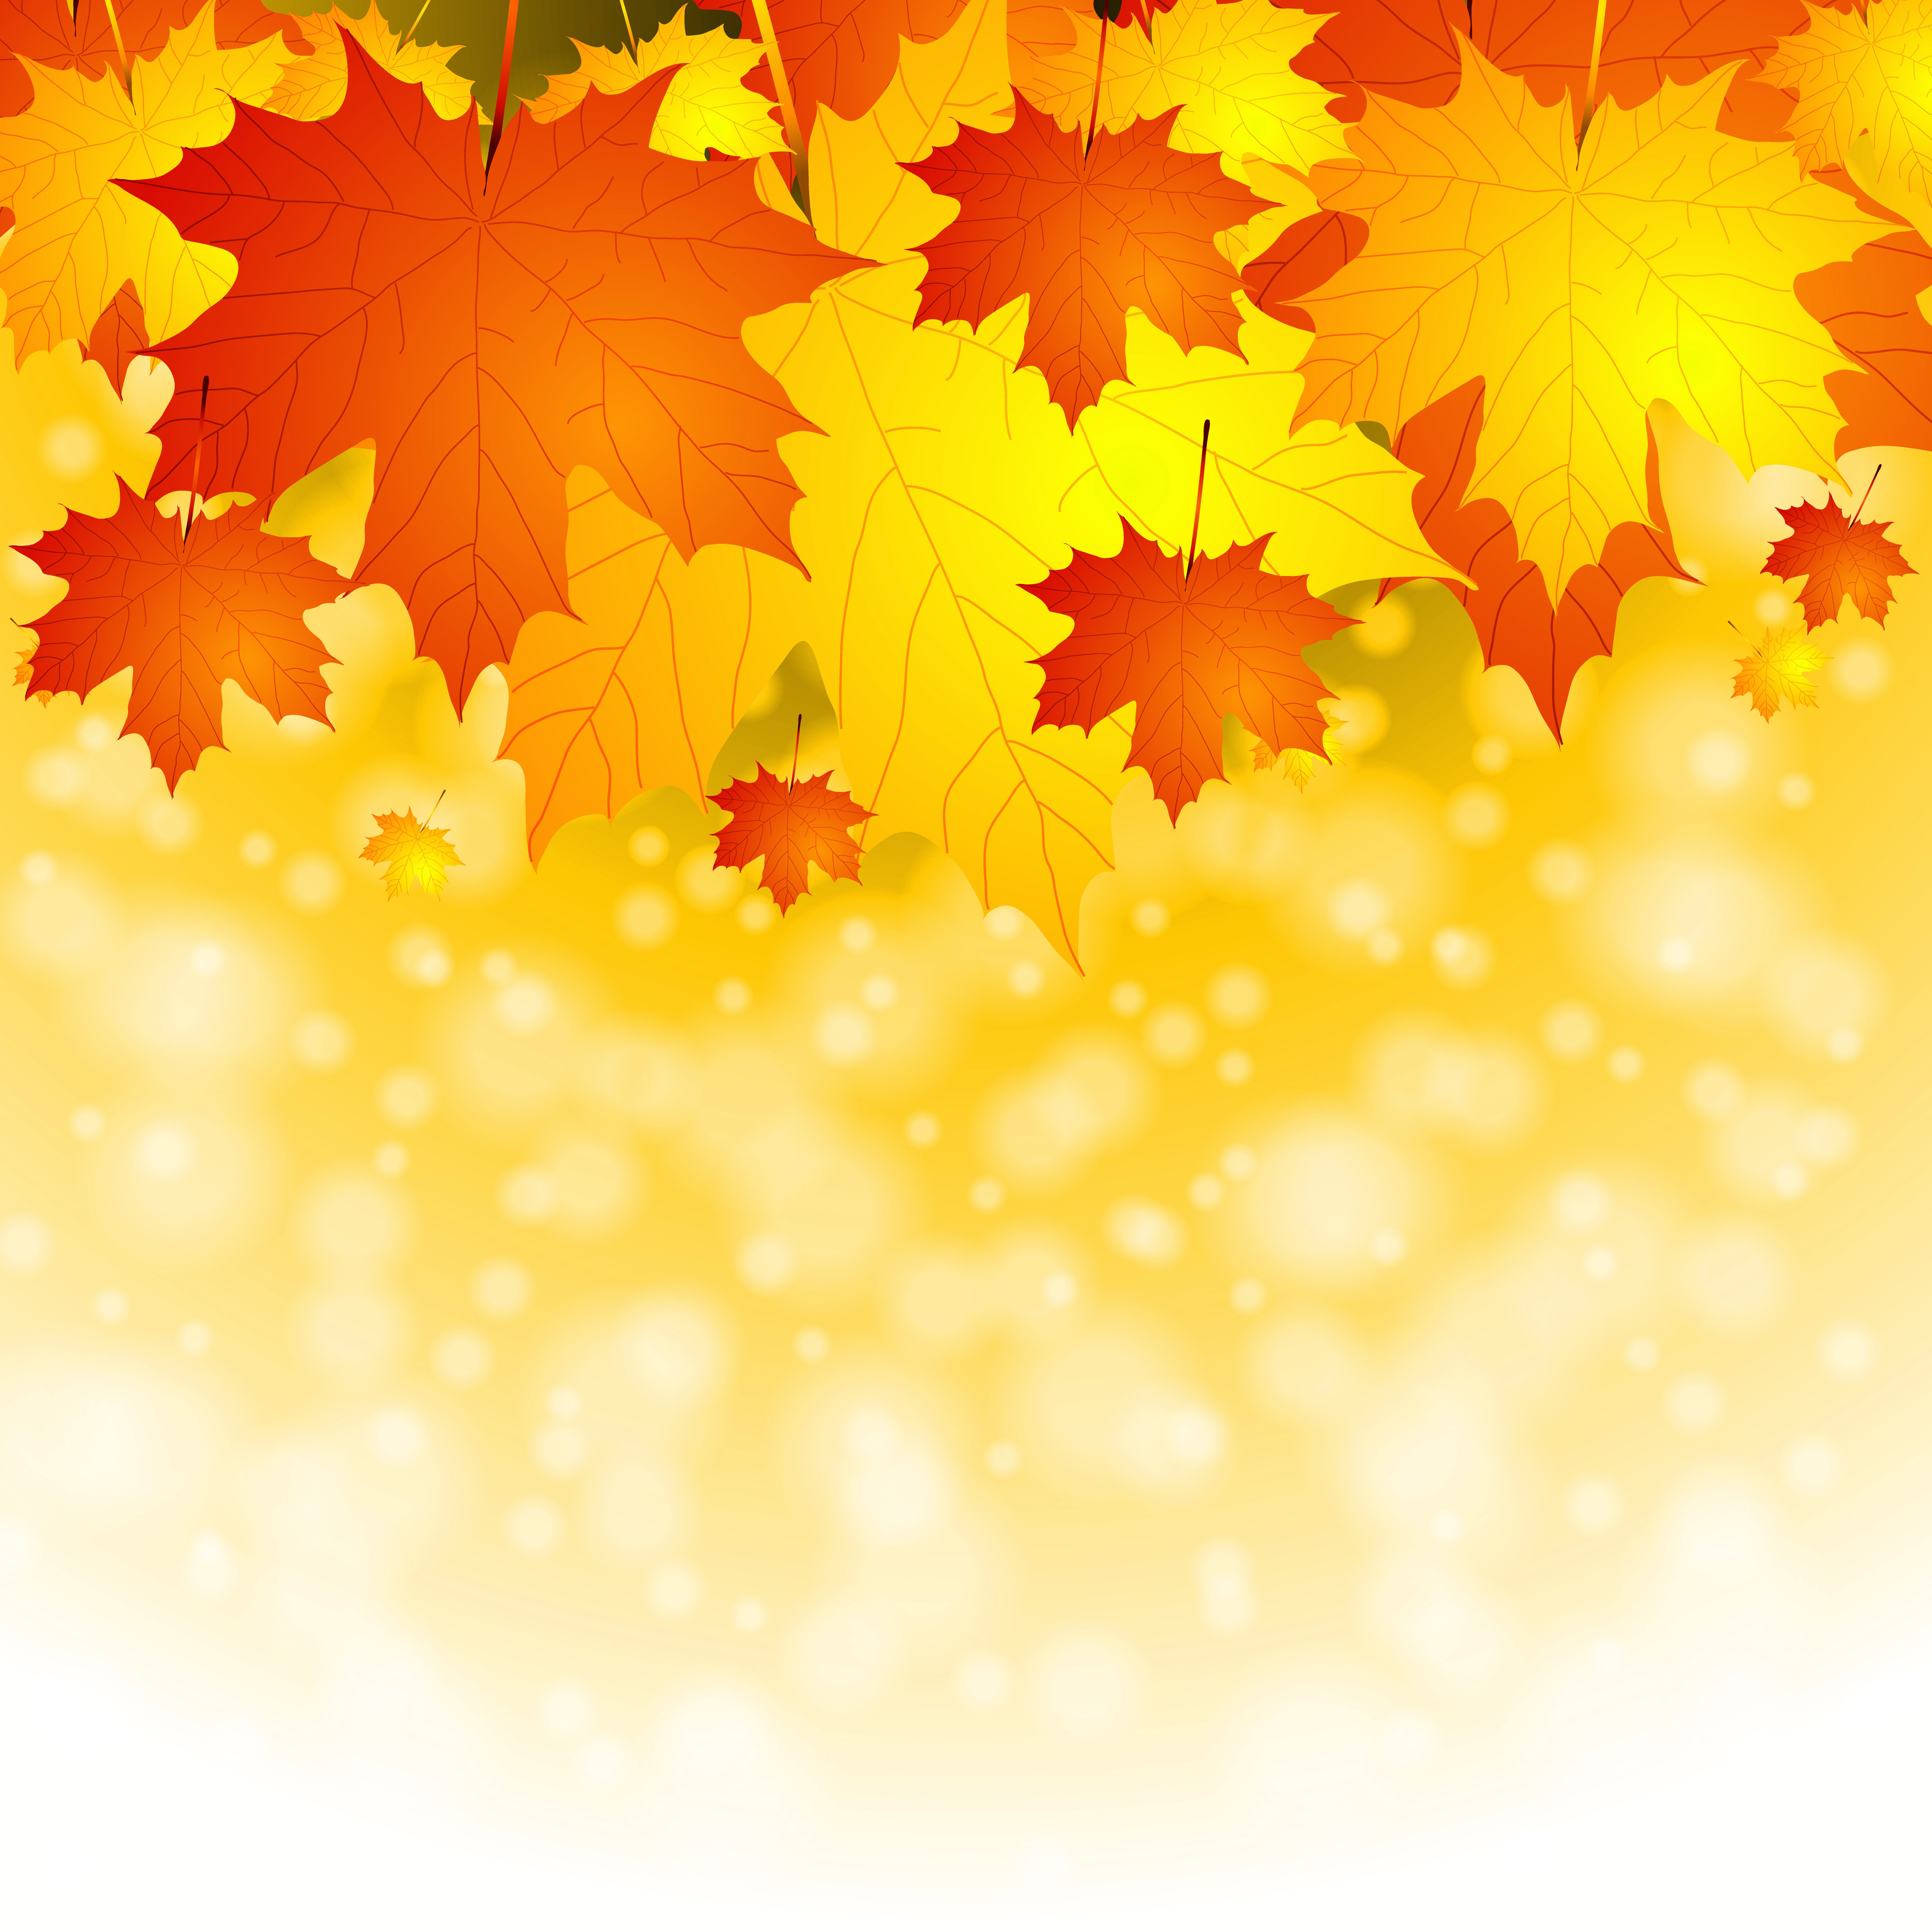 Fall Leaves Background Gallery Yopriceville High Quality